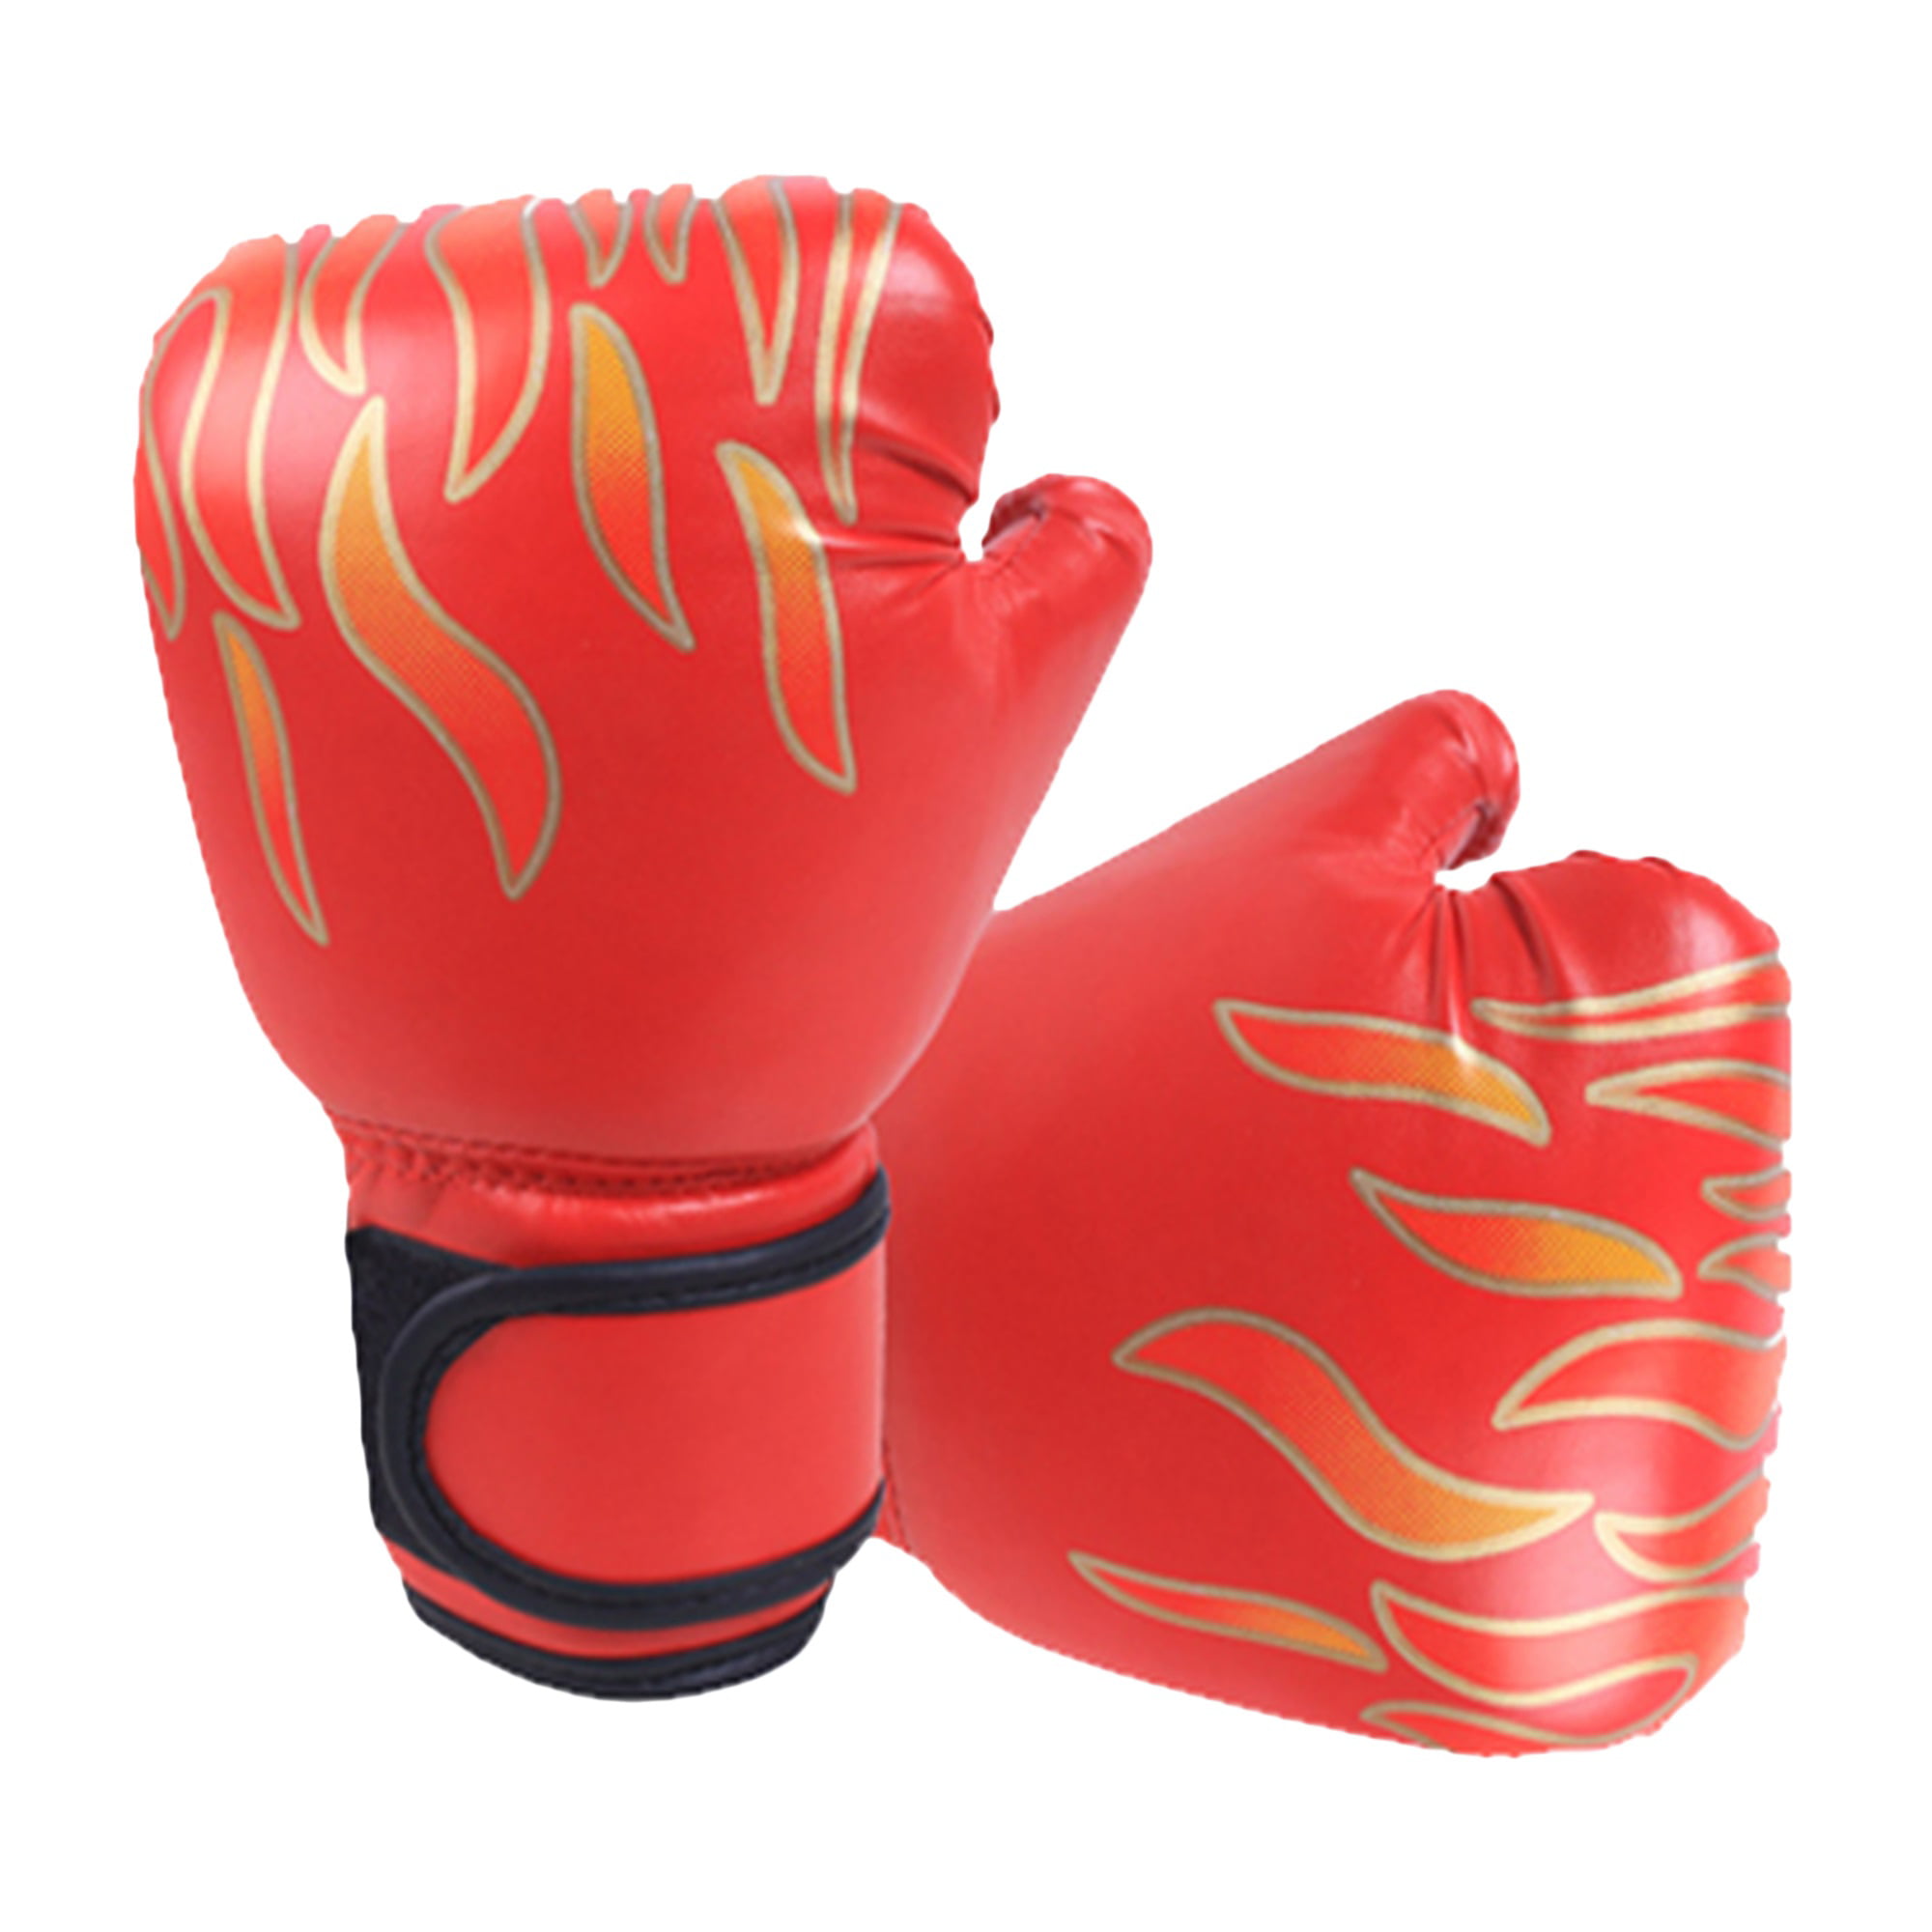 FP Kids Boxing Gloves Junior Punching Bag Mitts MMA Muay thai Training Sparring 